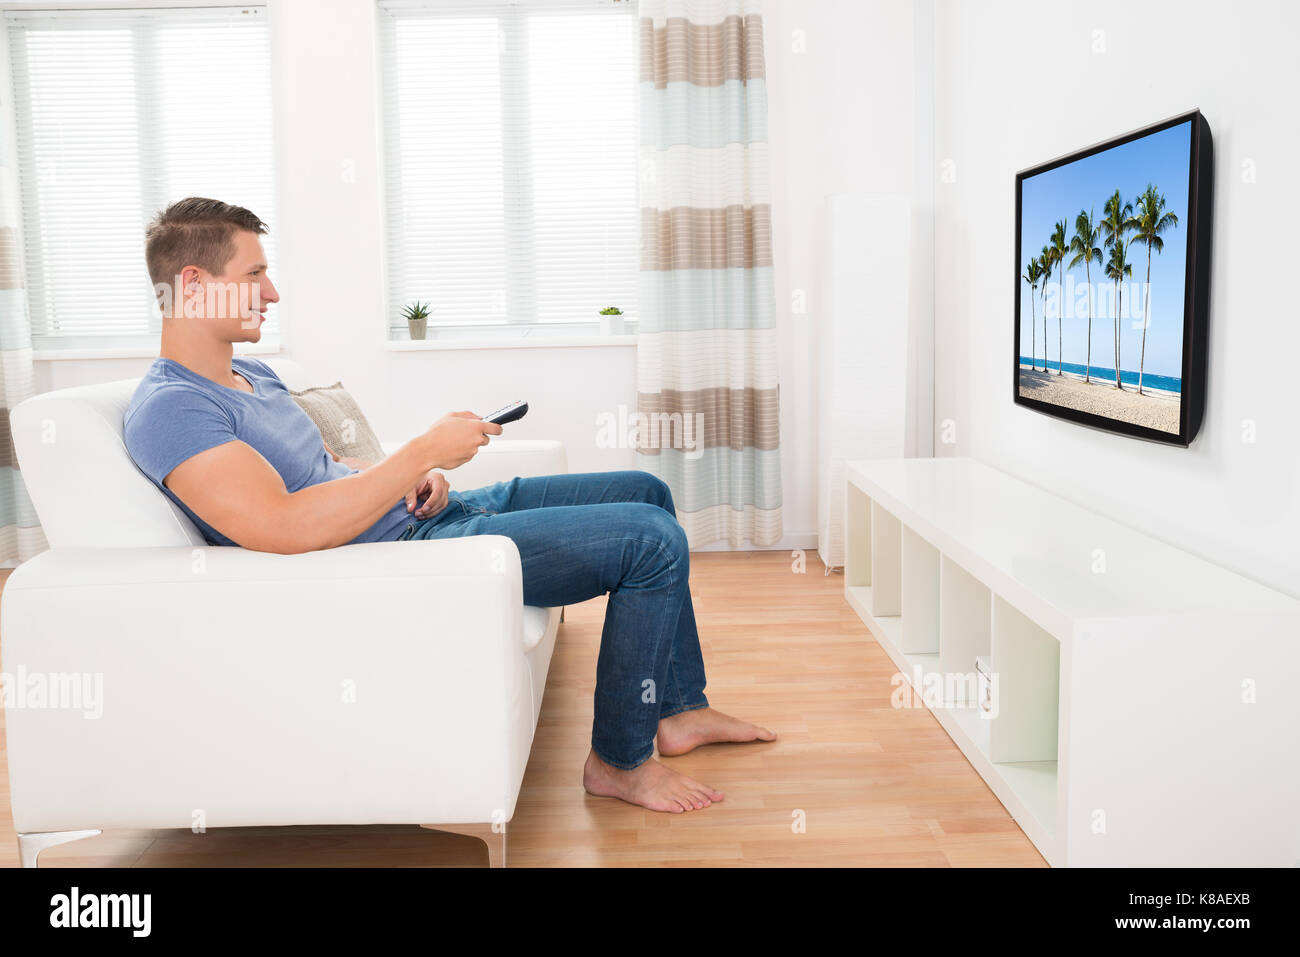 Young Man Sitting On Sofa Watching Television At Home Stock Photo